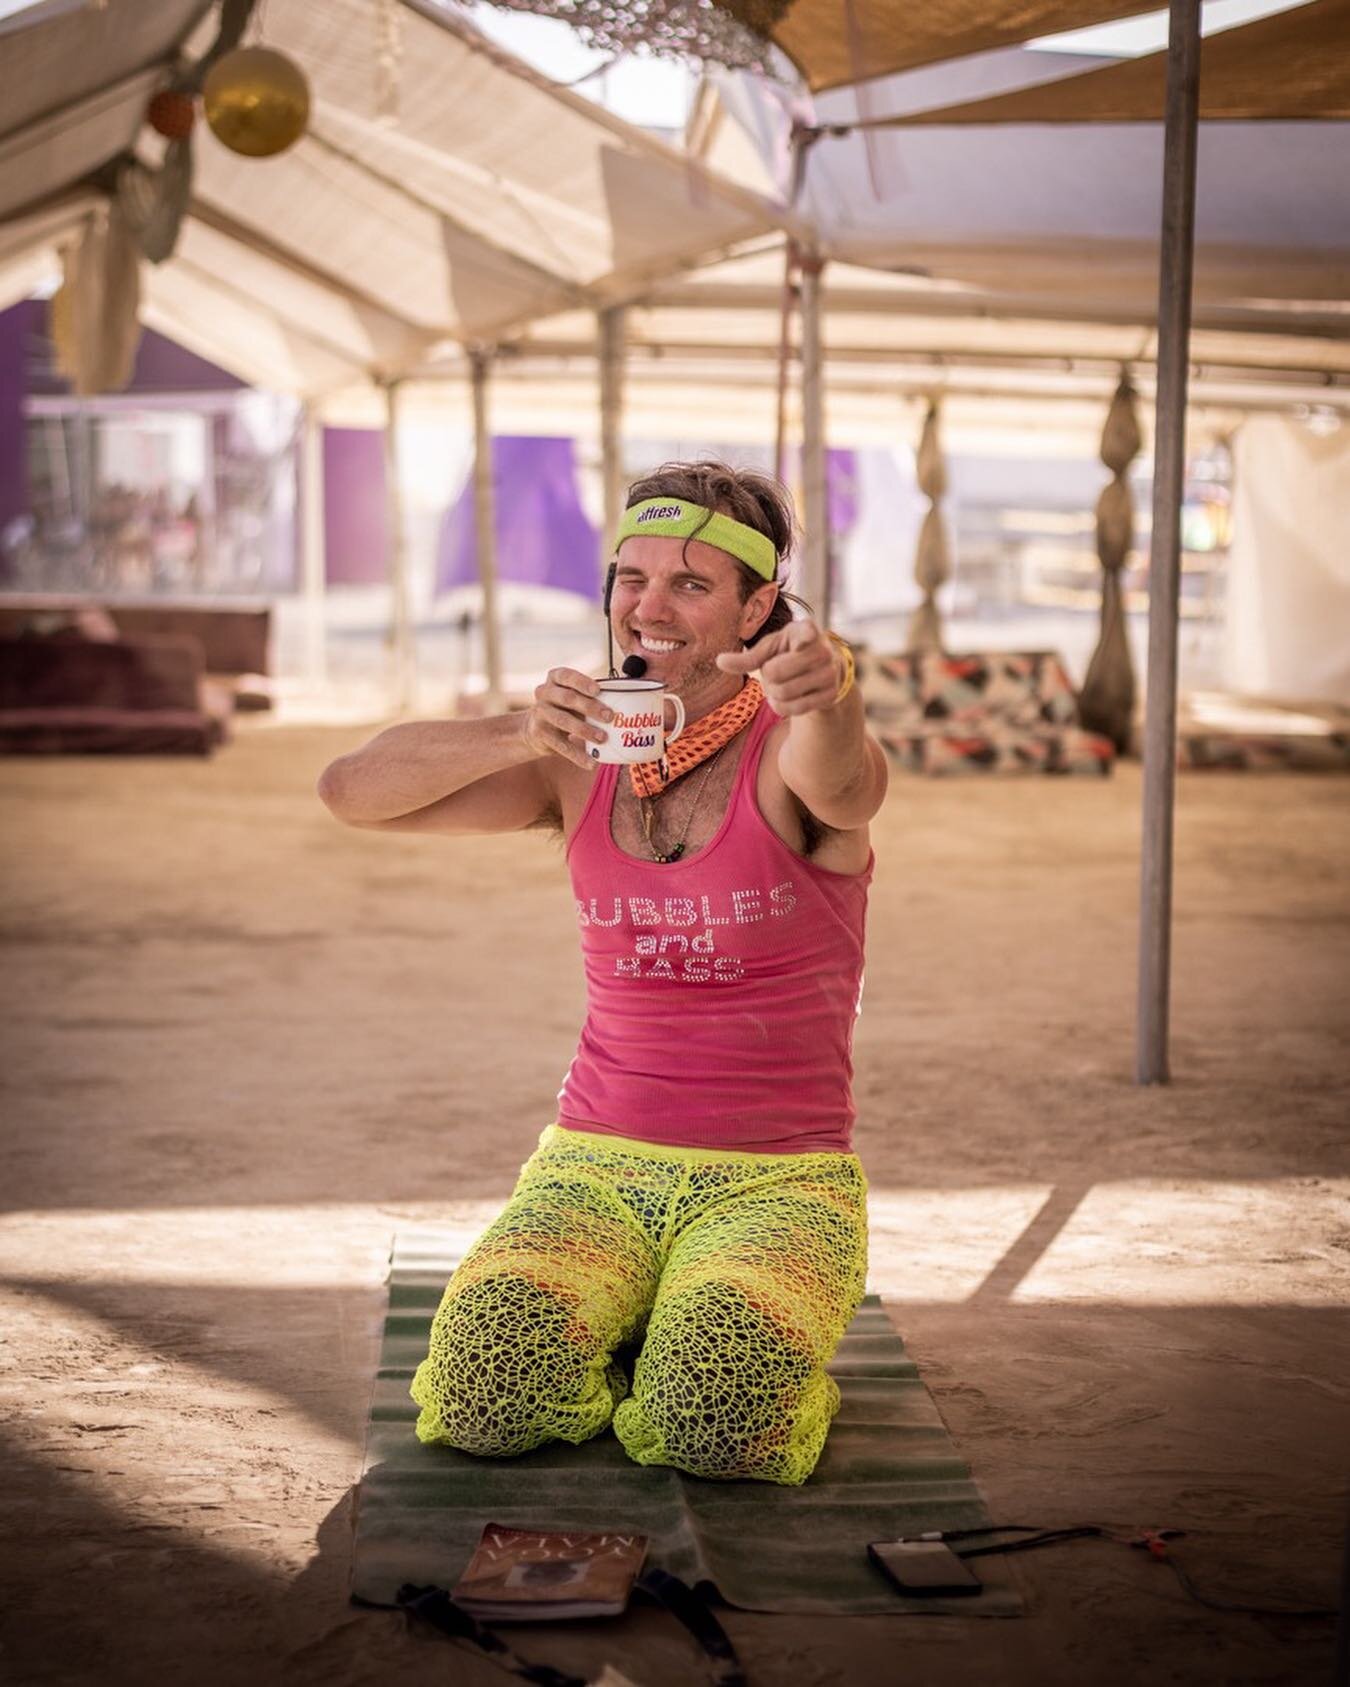 Is there a better event for Swami Mosa Yoga than Burning Man? You may have answered &ldquo;my bachelorette party,&rdquo; and you&rsquo;d be right, but still - Swami Mosa Yoga has been a staple at @bubbles.and.bass on Esplanade since 2017. In fact, th